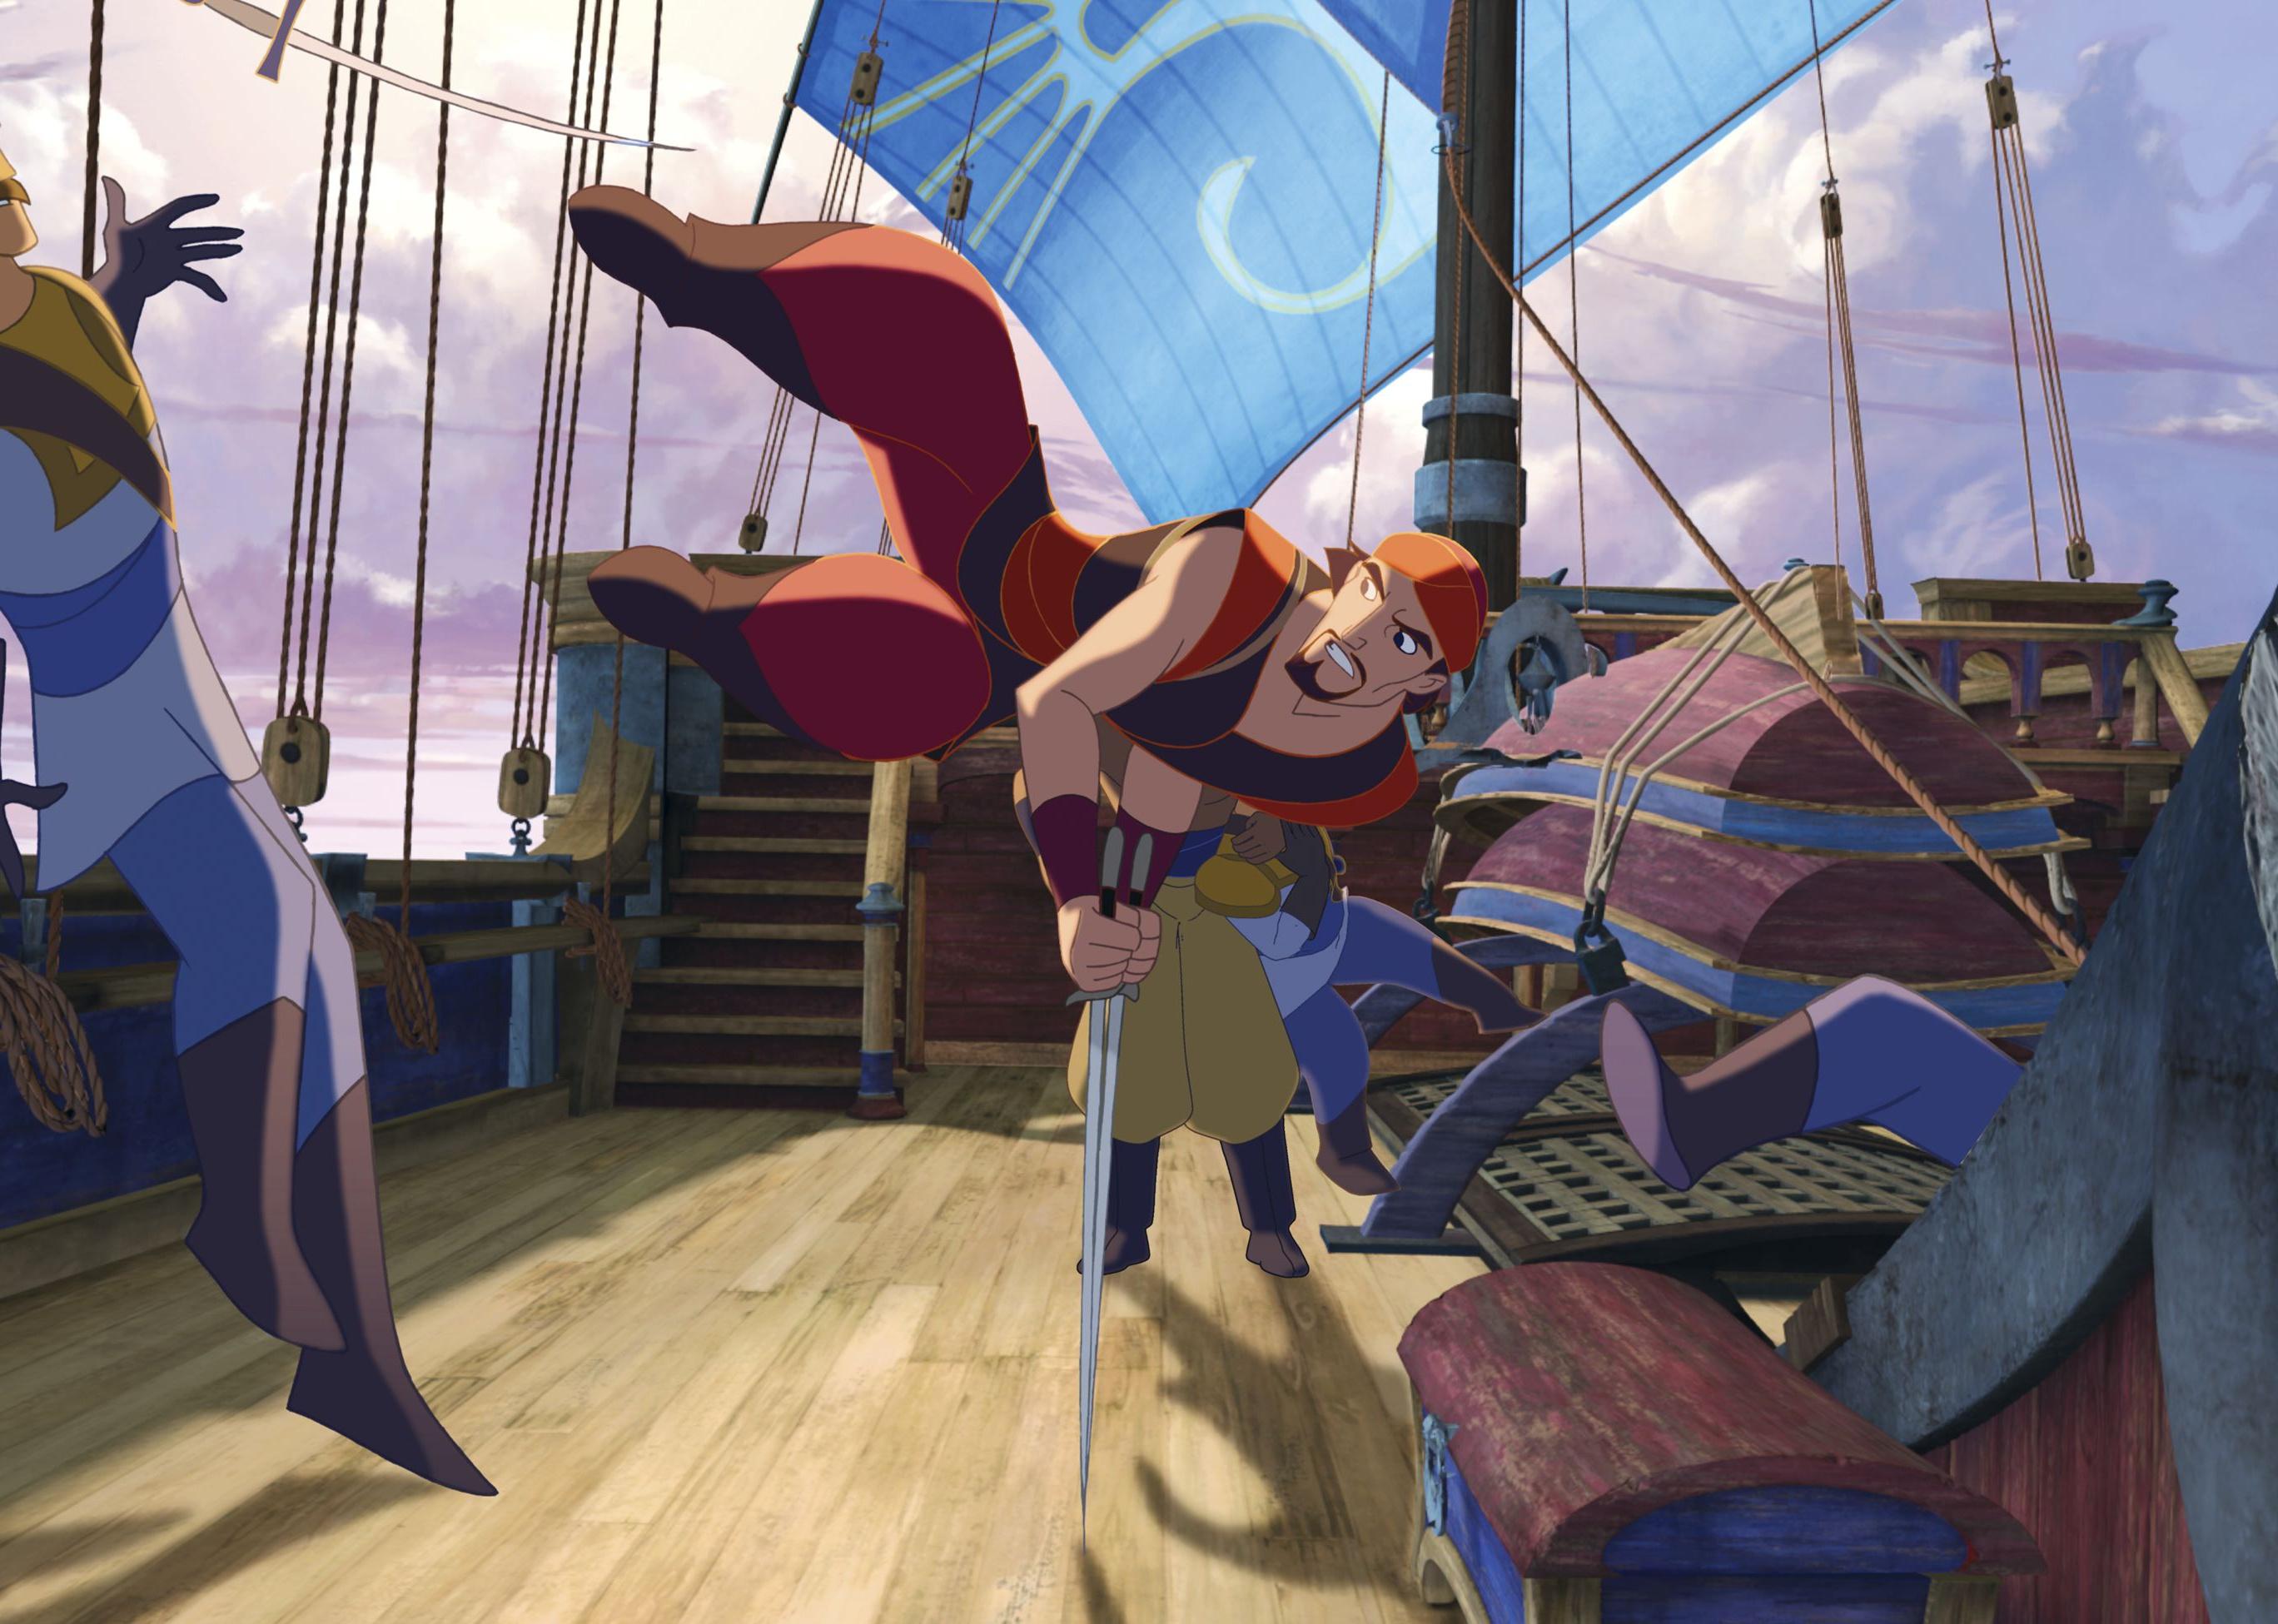 Two male cartoon characters fighting with swords on a ship.